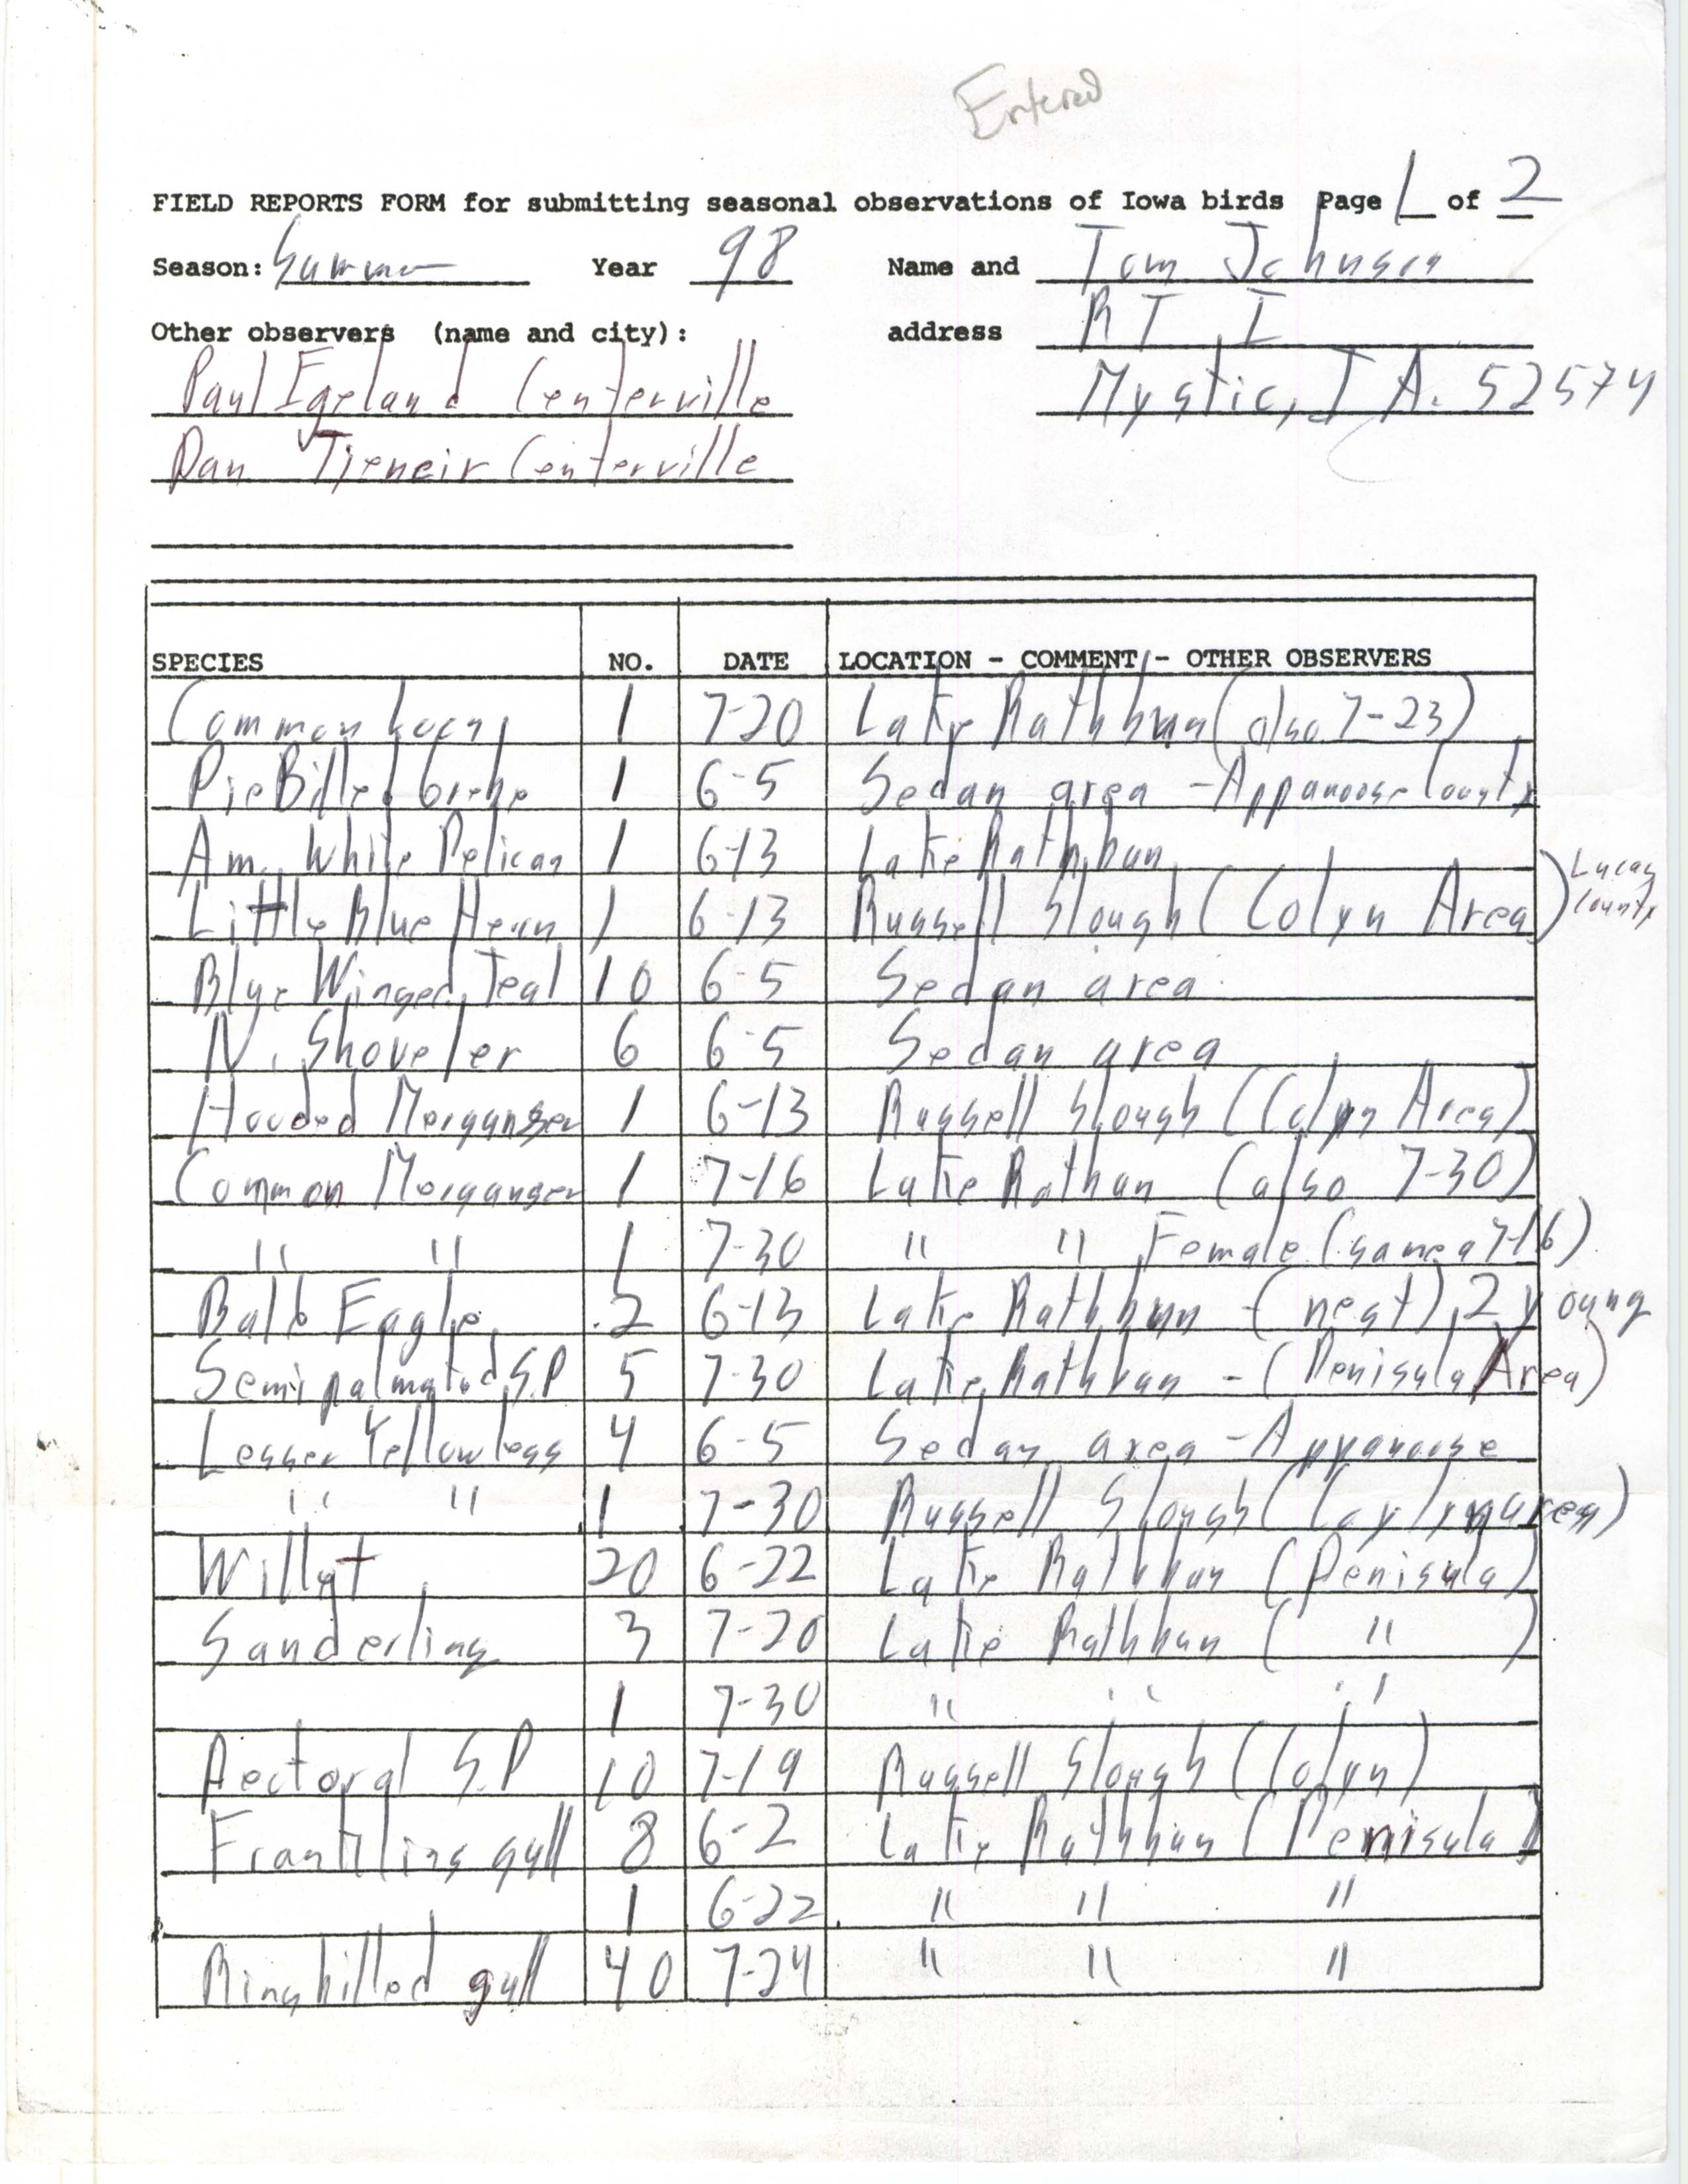 Field reports form for submitting seasonal observations of Iowa birds, Tom Johnson, summer 1998